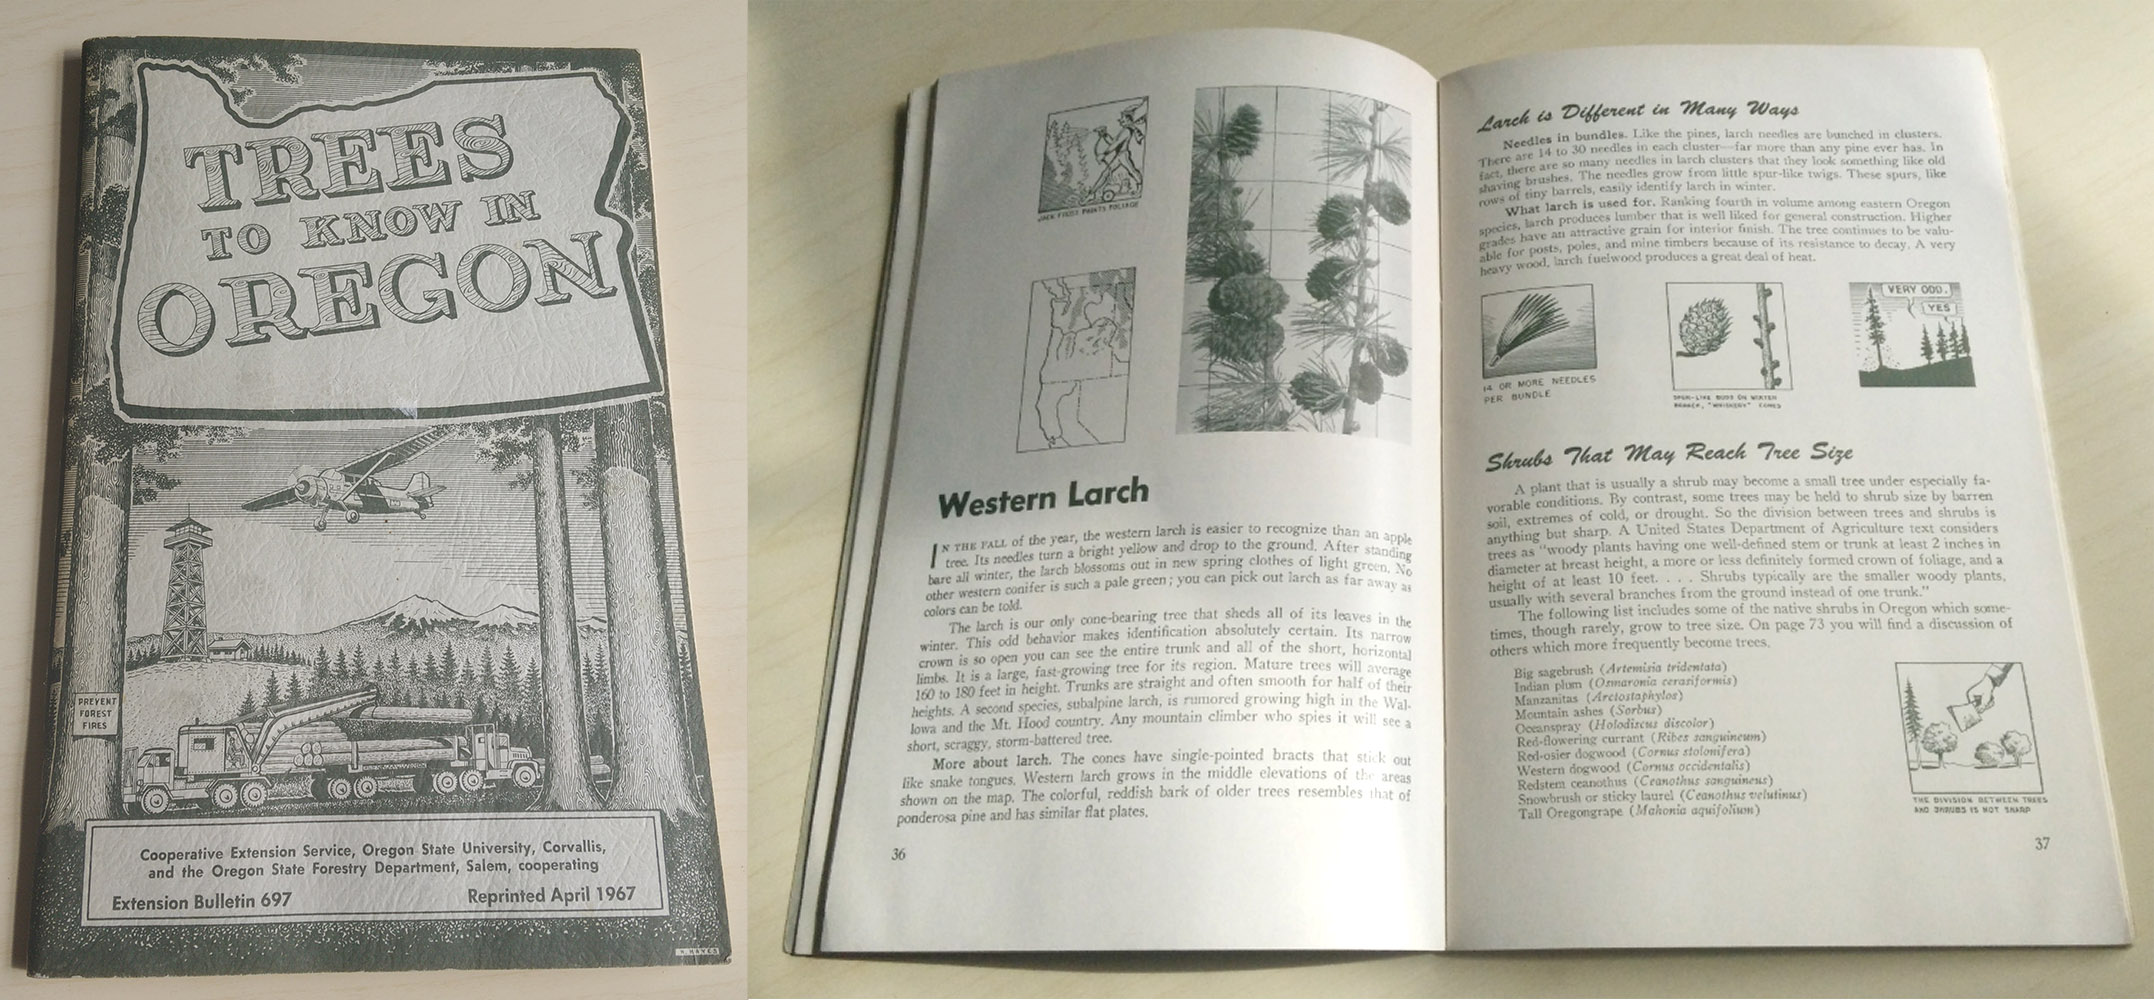 On the left, a closed book entitled "Trees to know in Oregon", and on the right, an open book on a page about the Western Larch